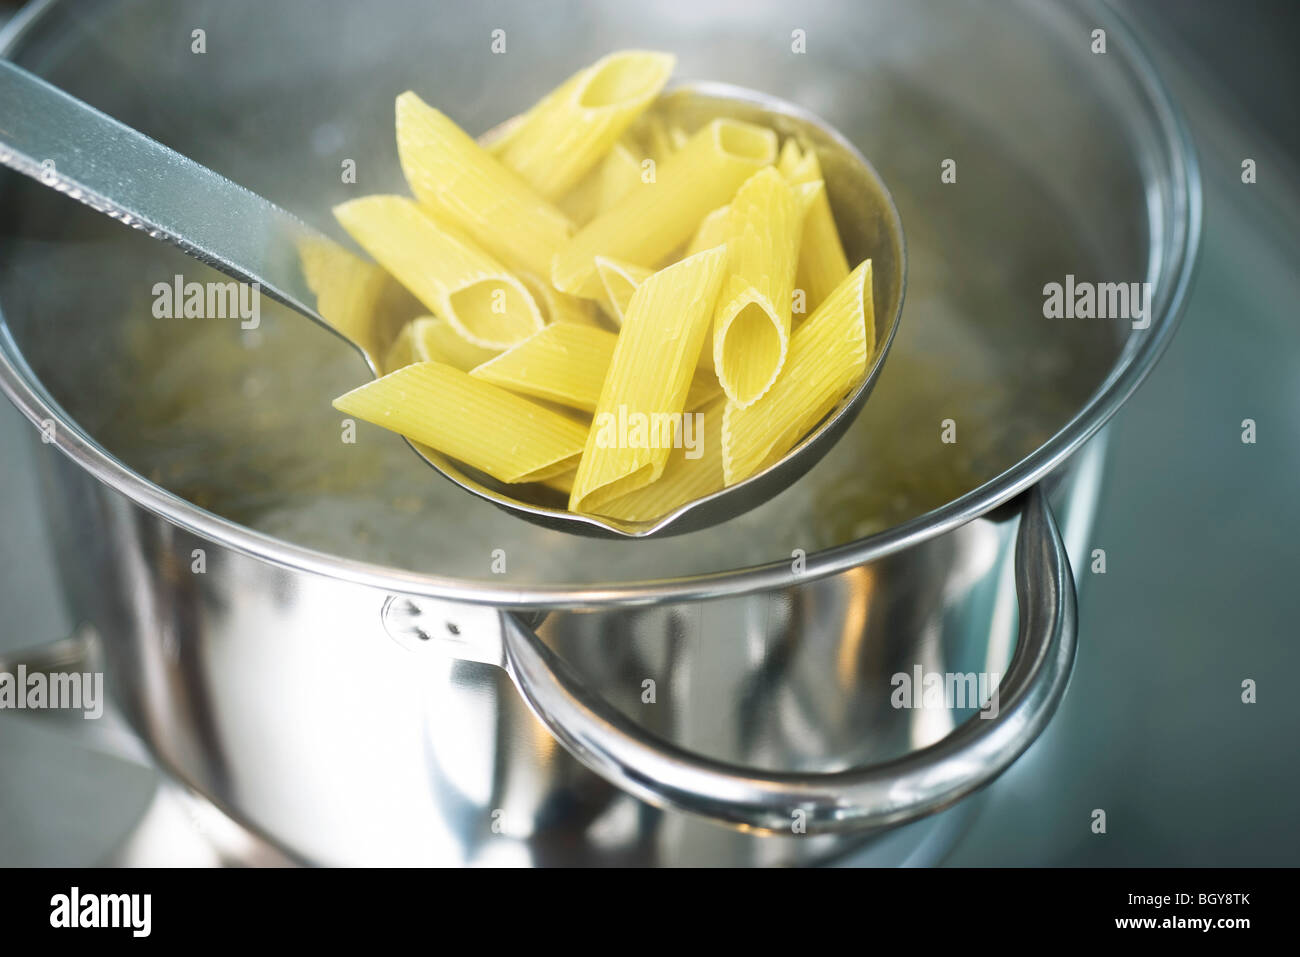 Cooking penne pasta Stock Photo